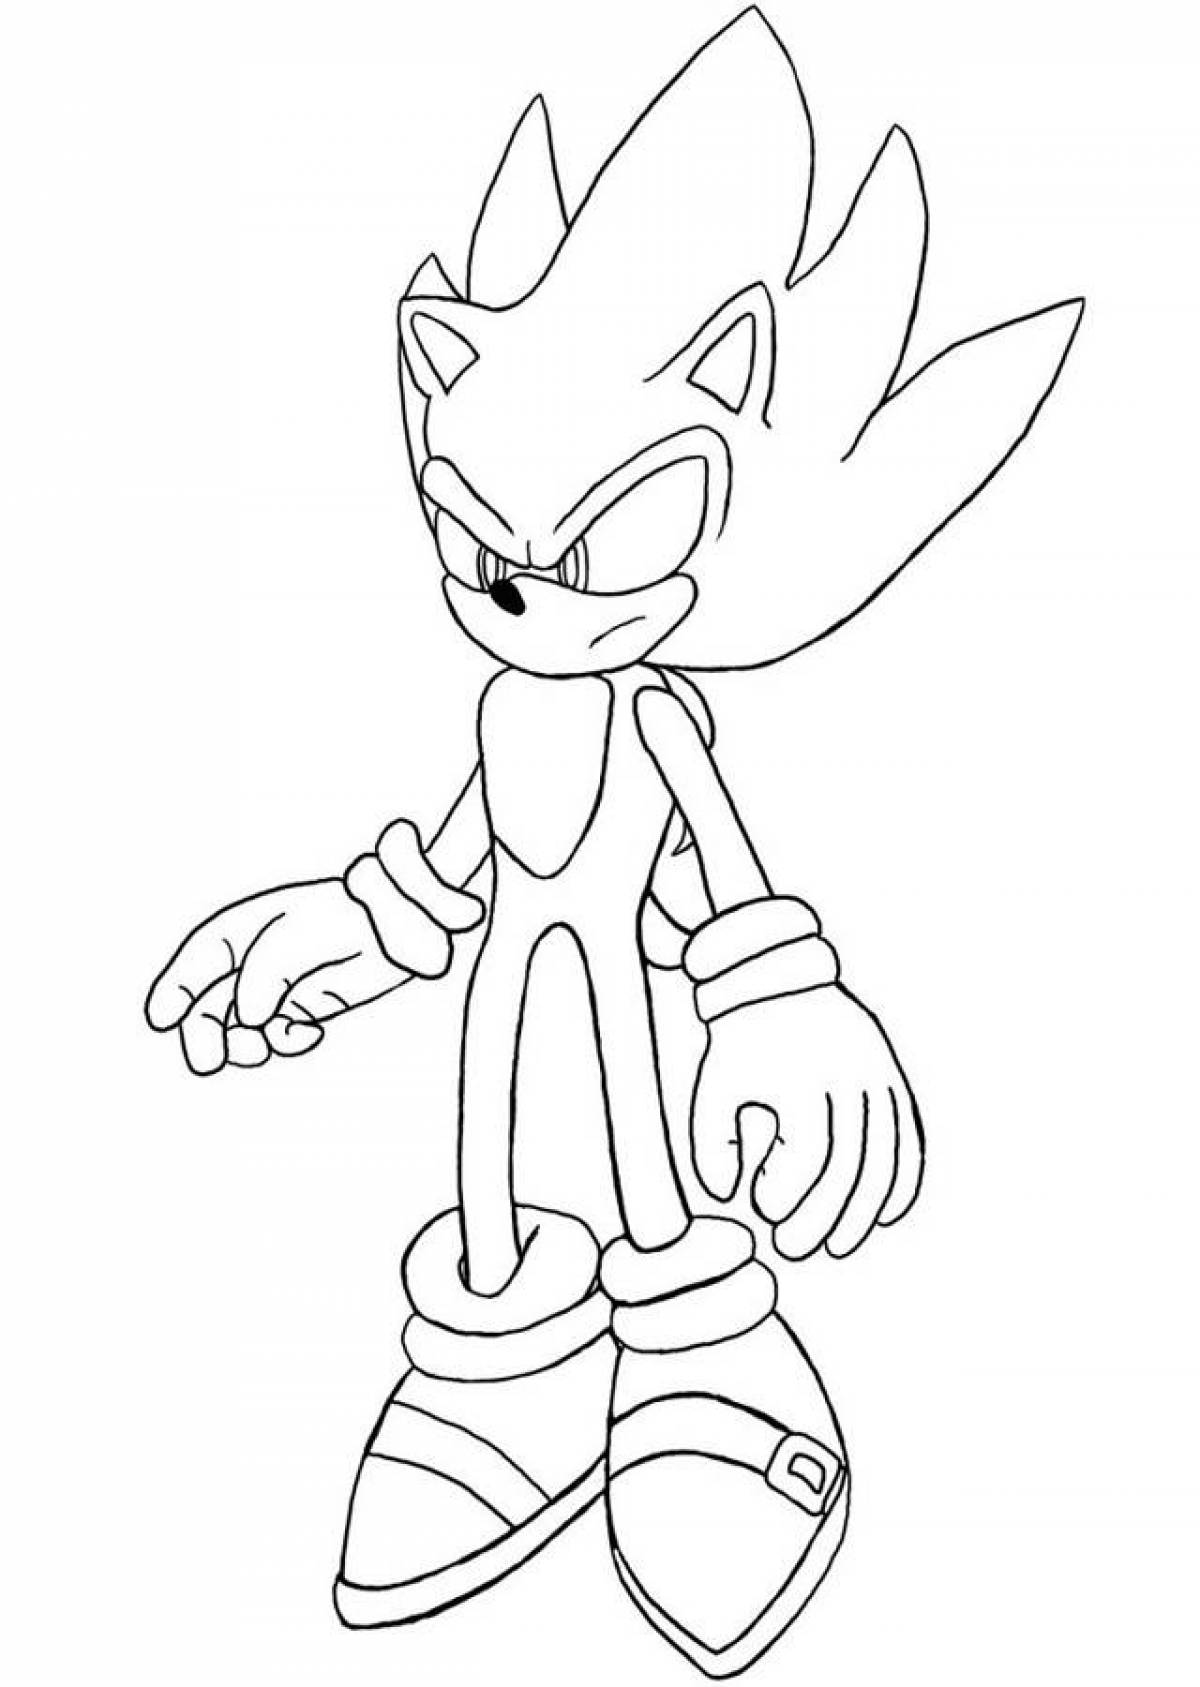 Sonic's vibrant coloring book